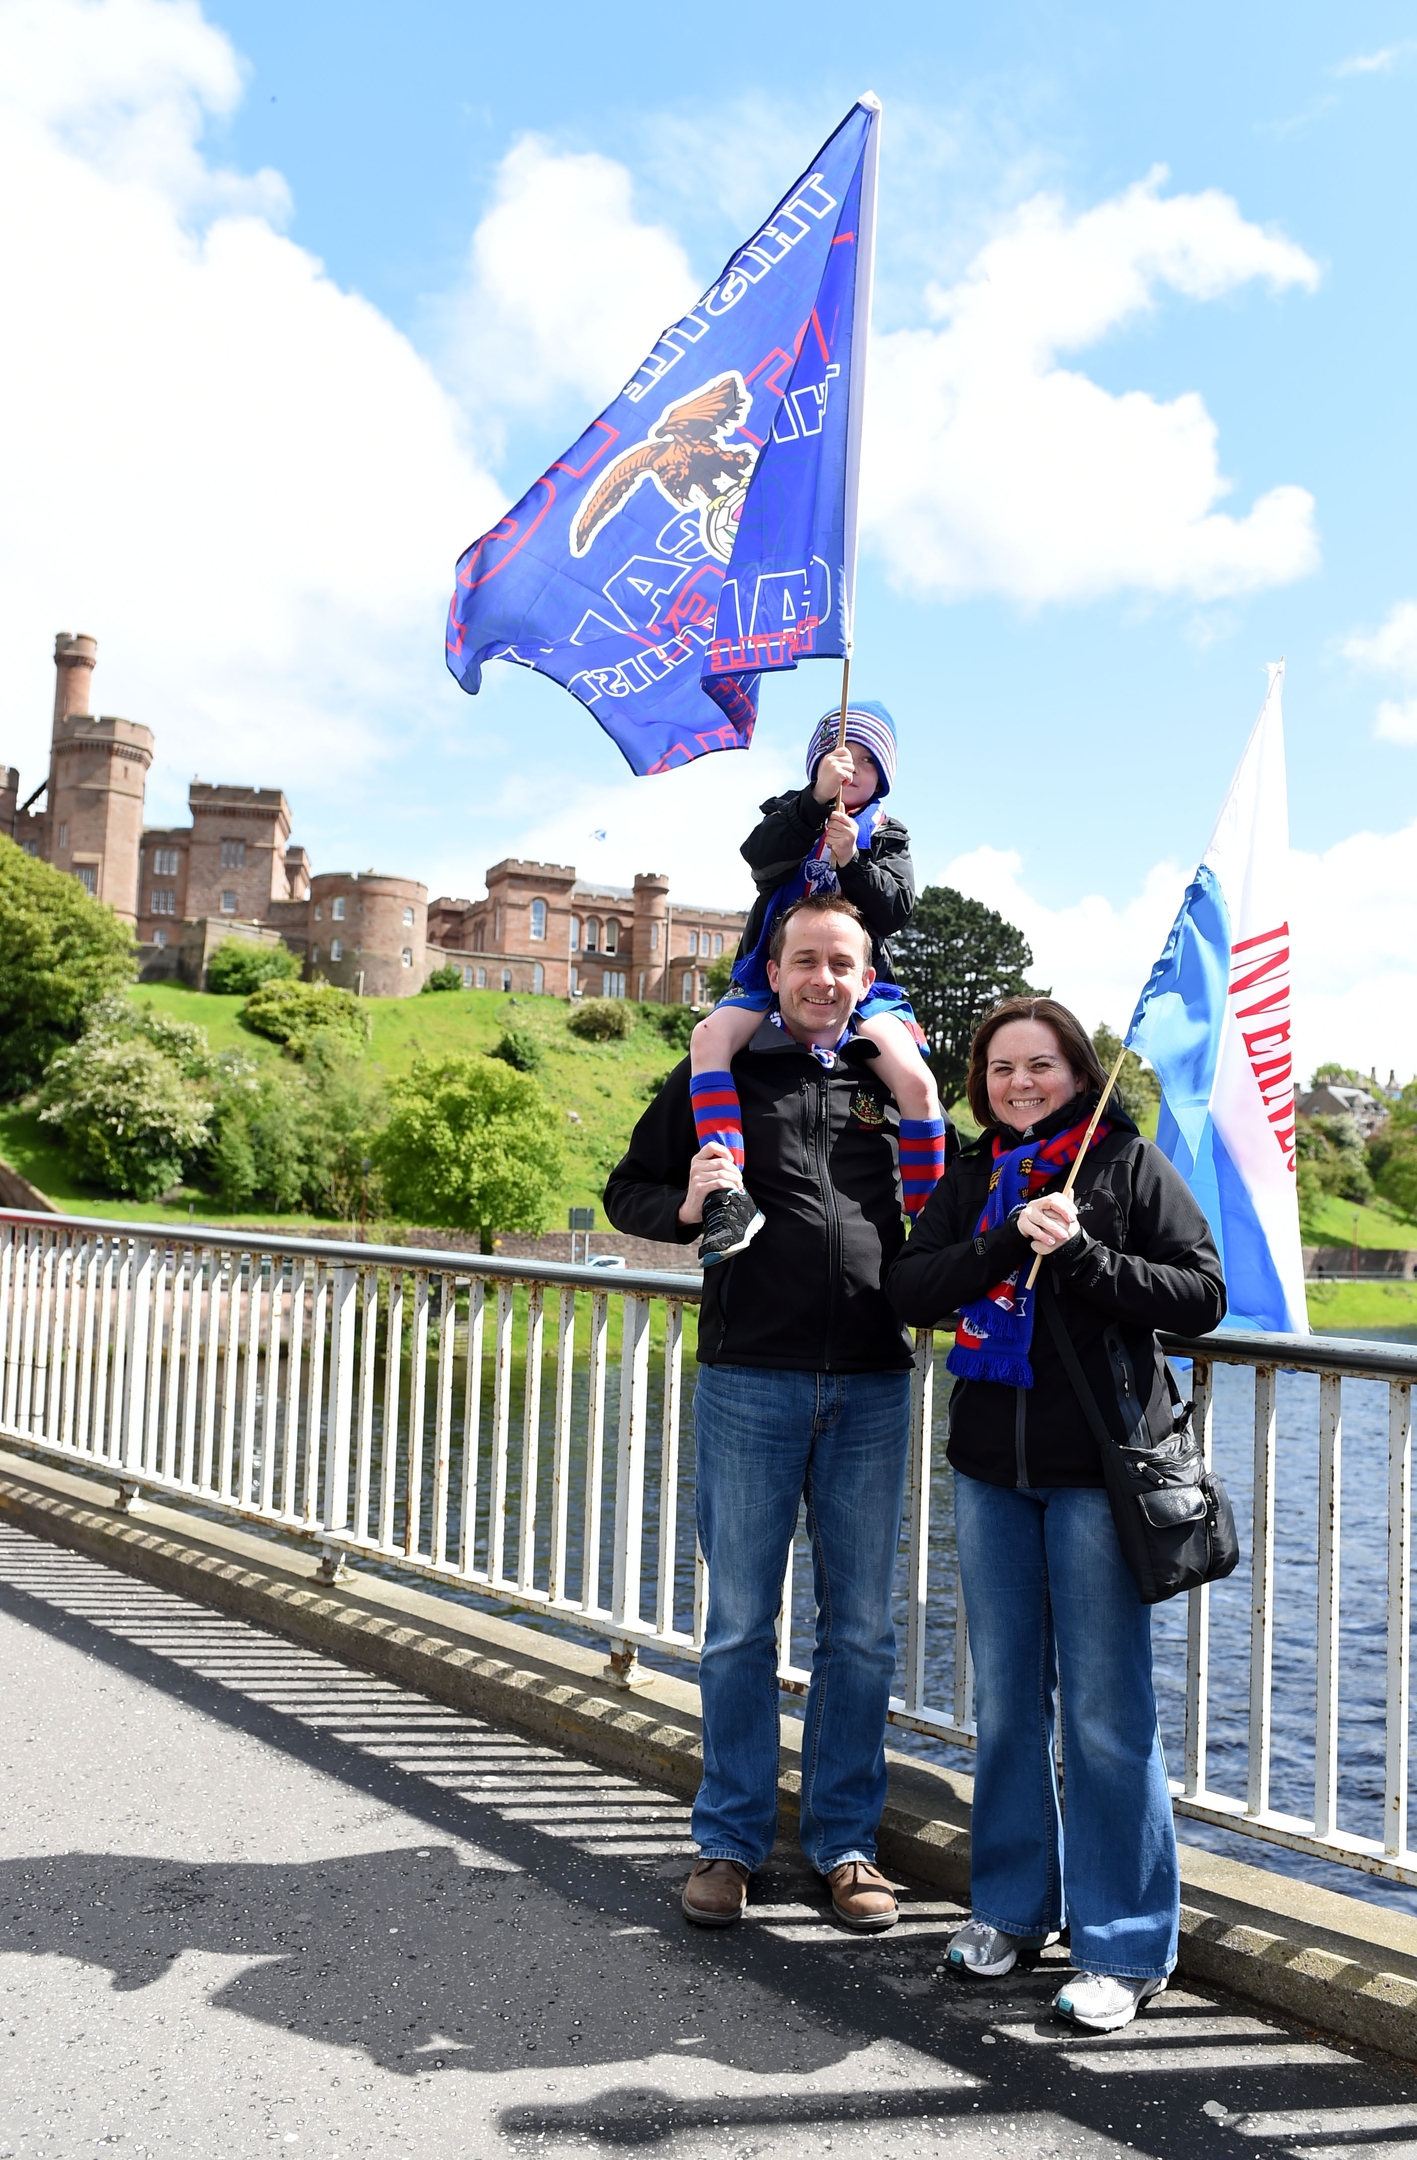 The ICT fans line the streets of Inverness this afternoon as they wait for a glimpse of the Scottish Cup trophy